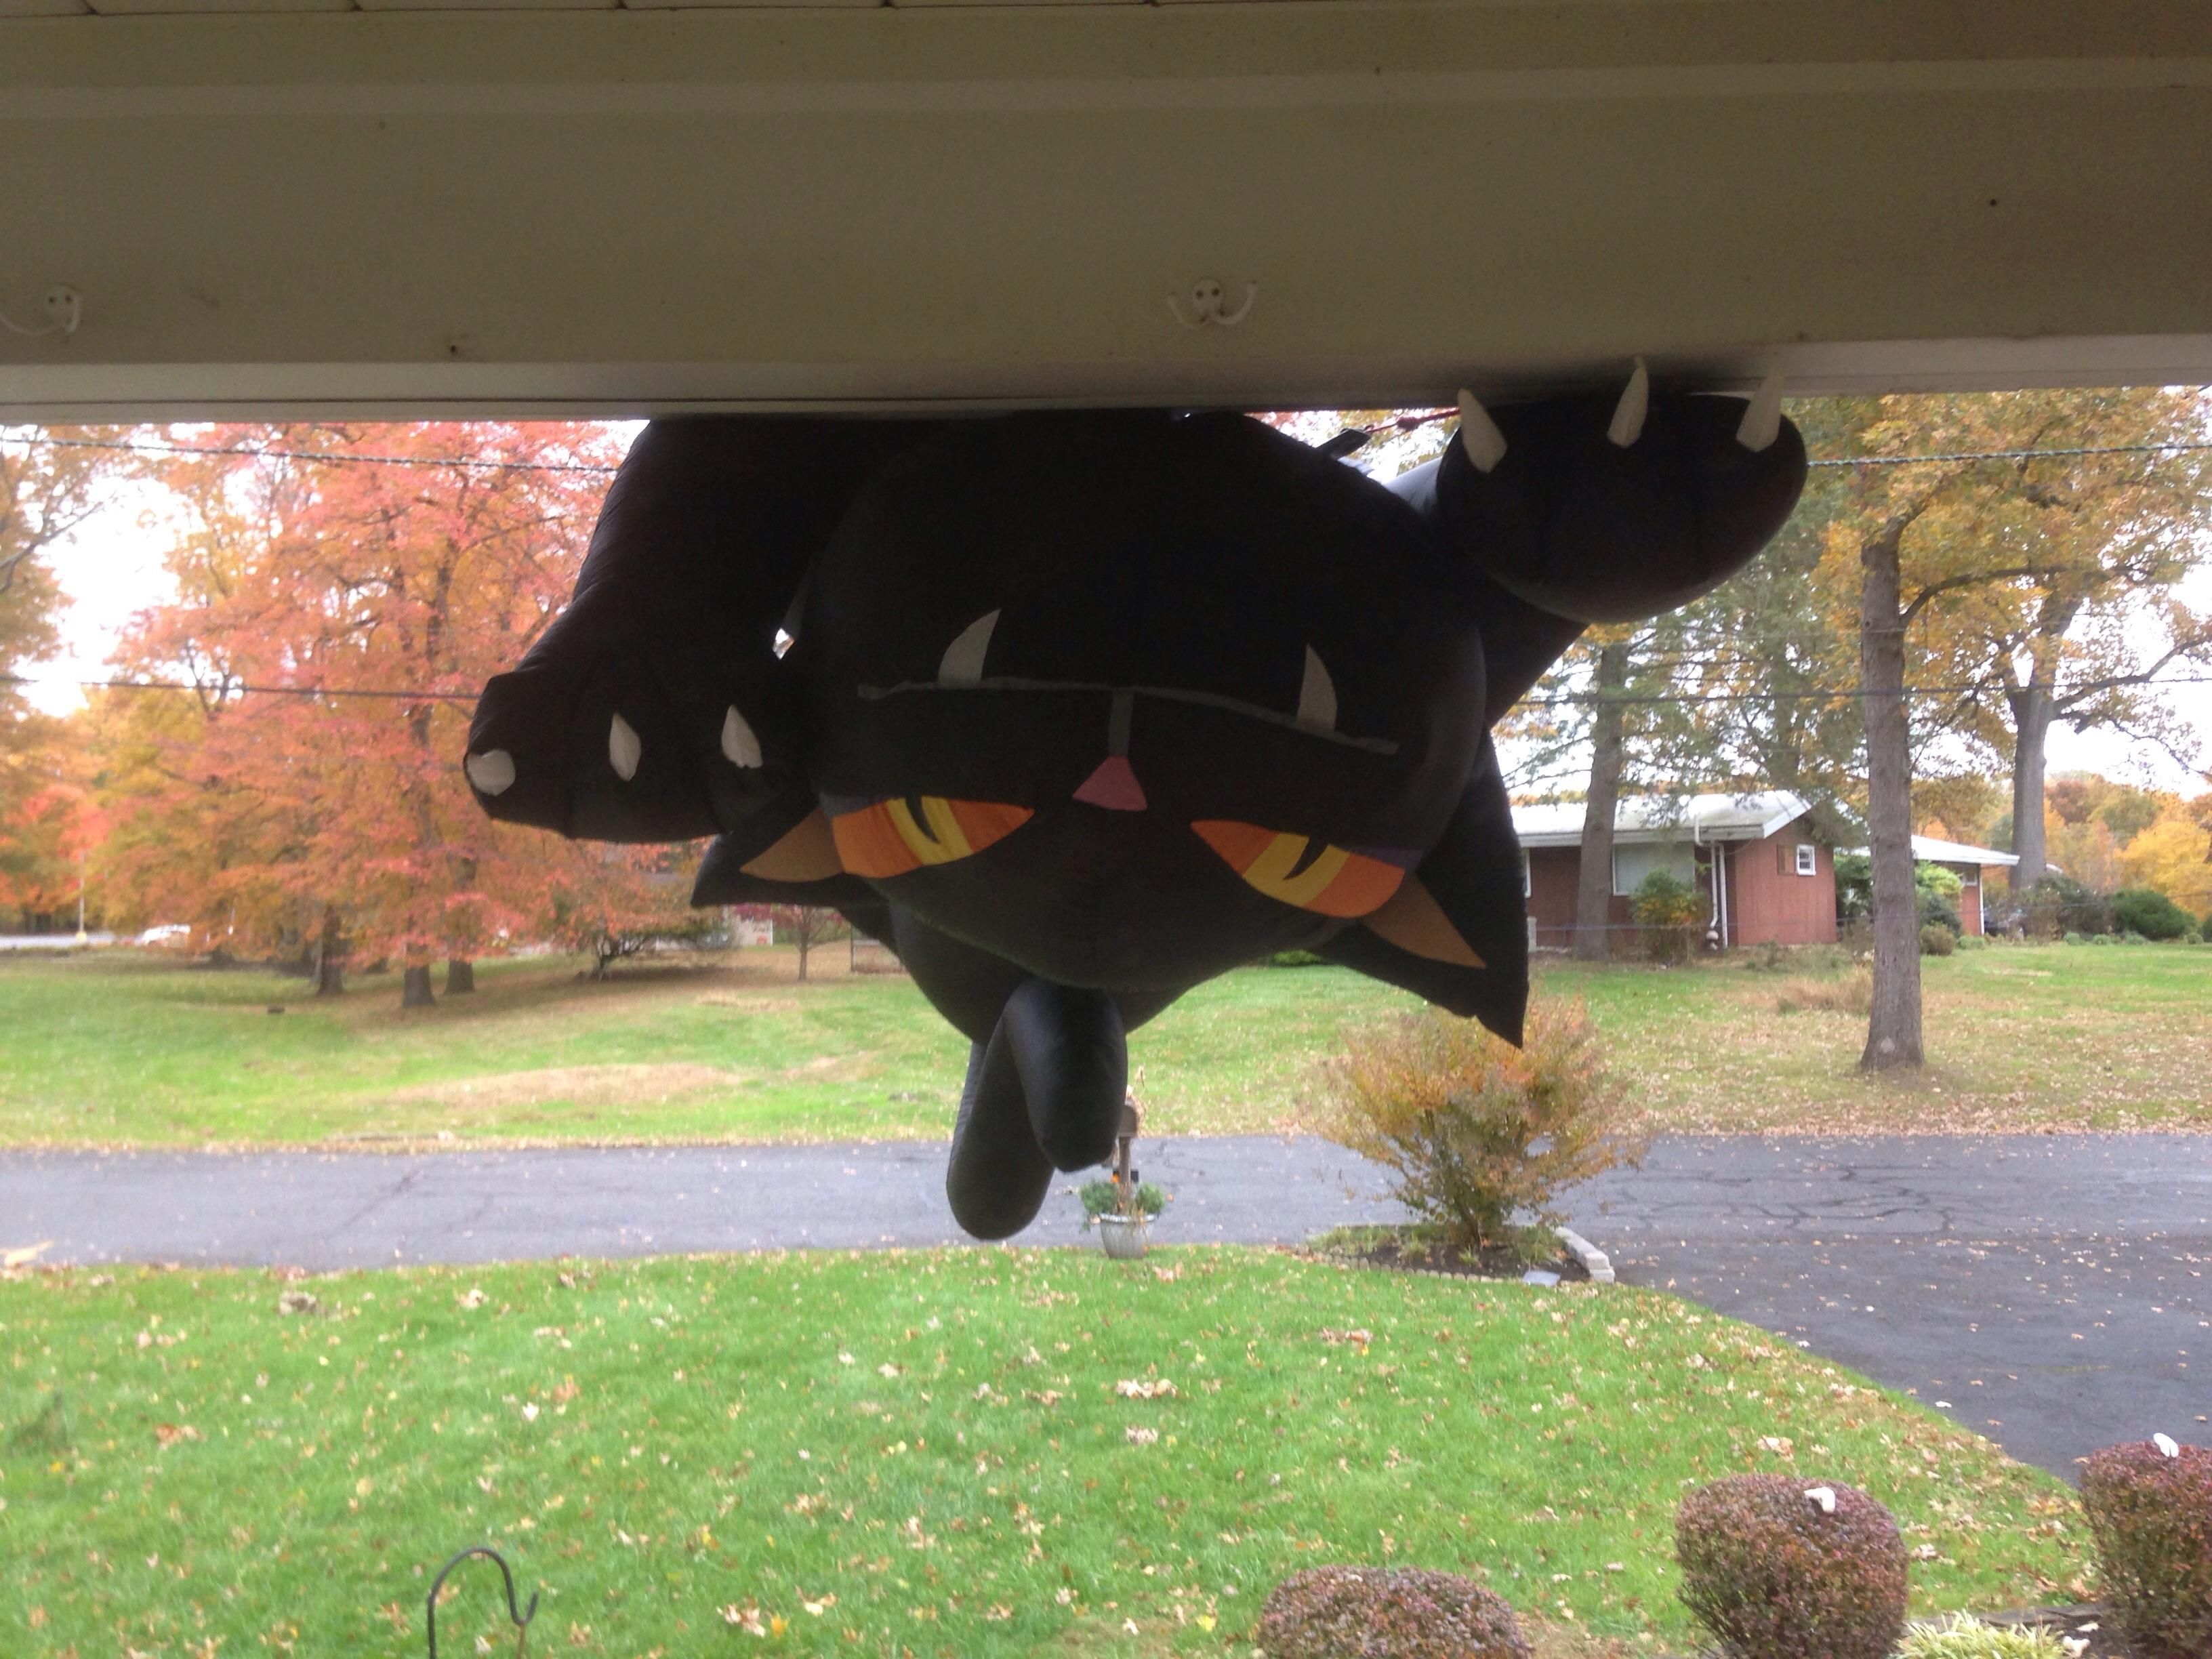 For Halloween I had an inflatable cat on my roof. Last night it was very windy. This is what greeted me when I opened the door this morning. Almost had a heart attack.